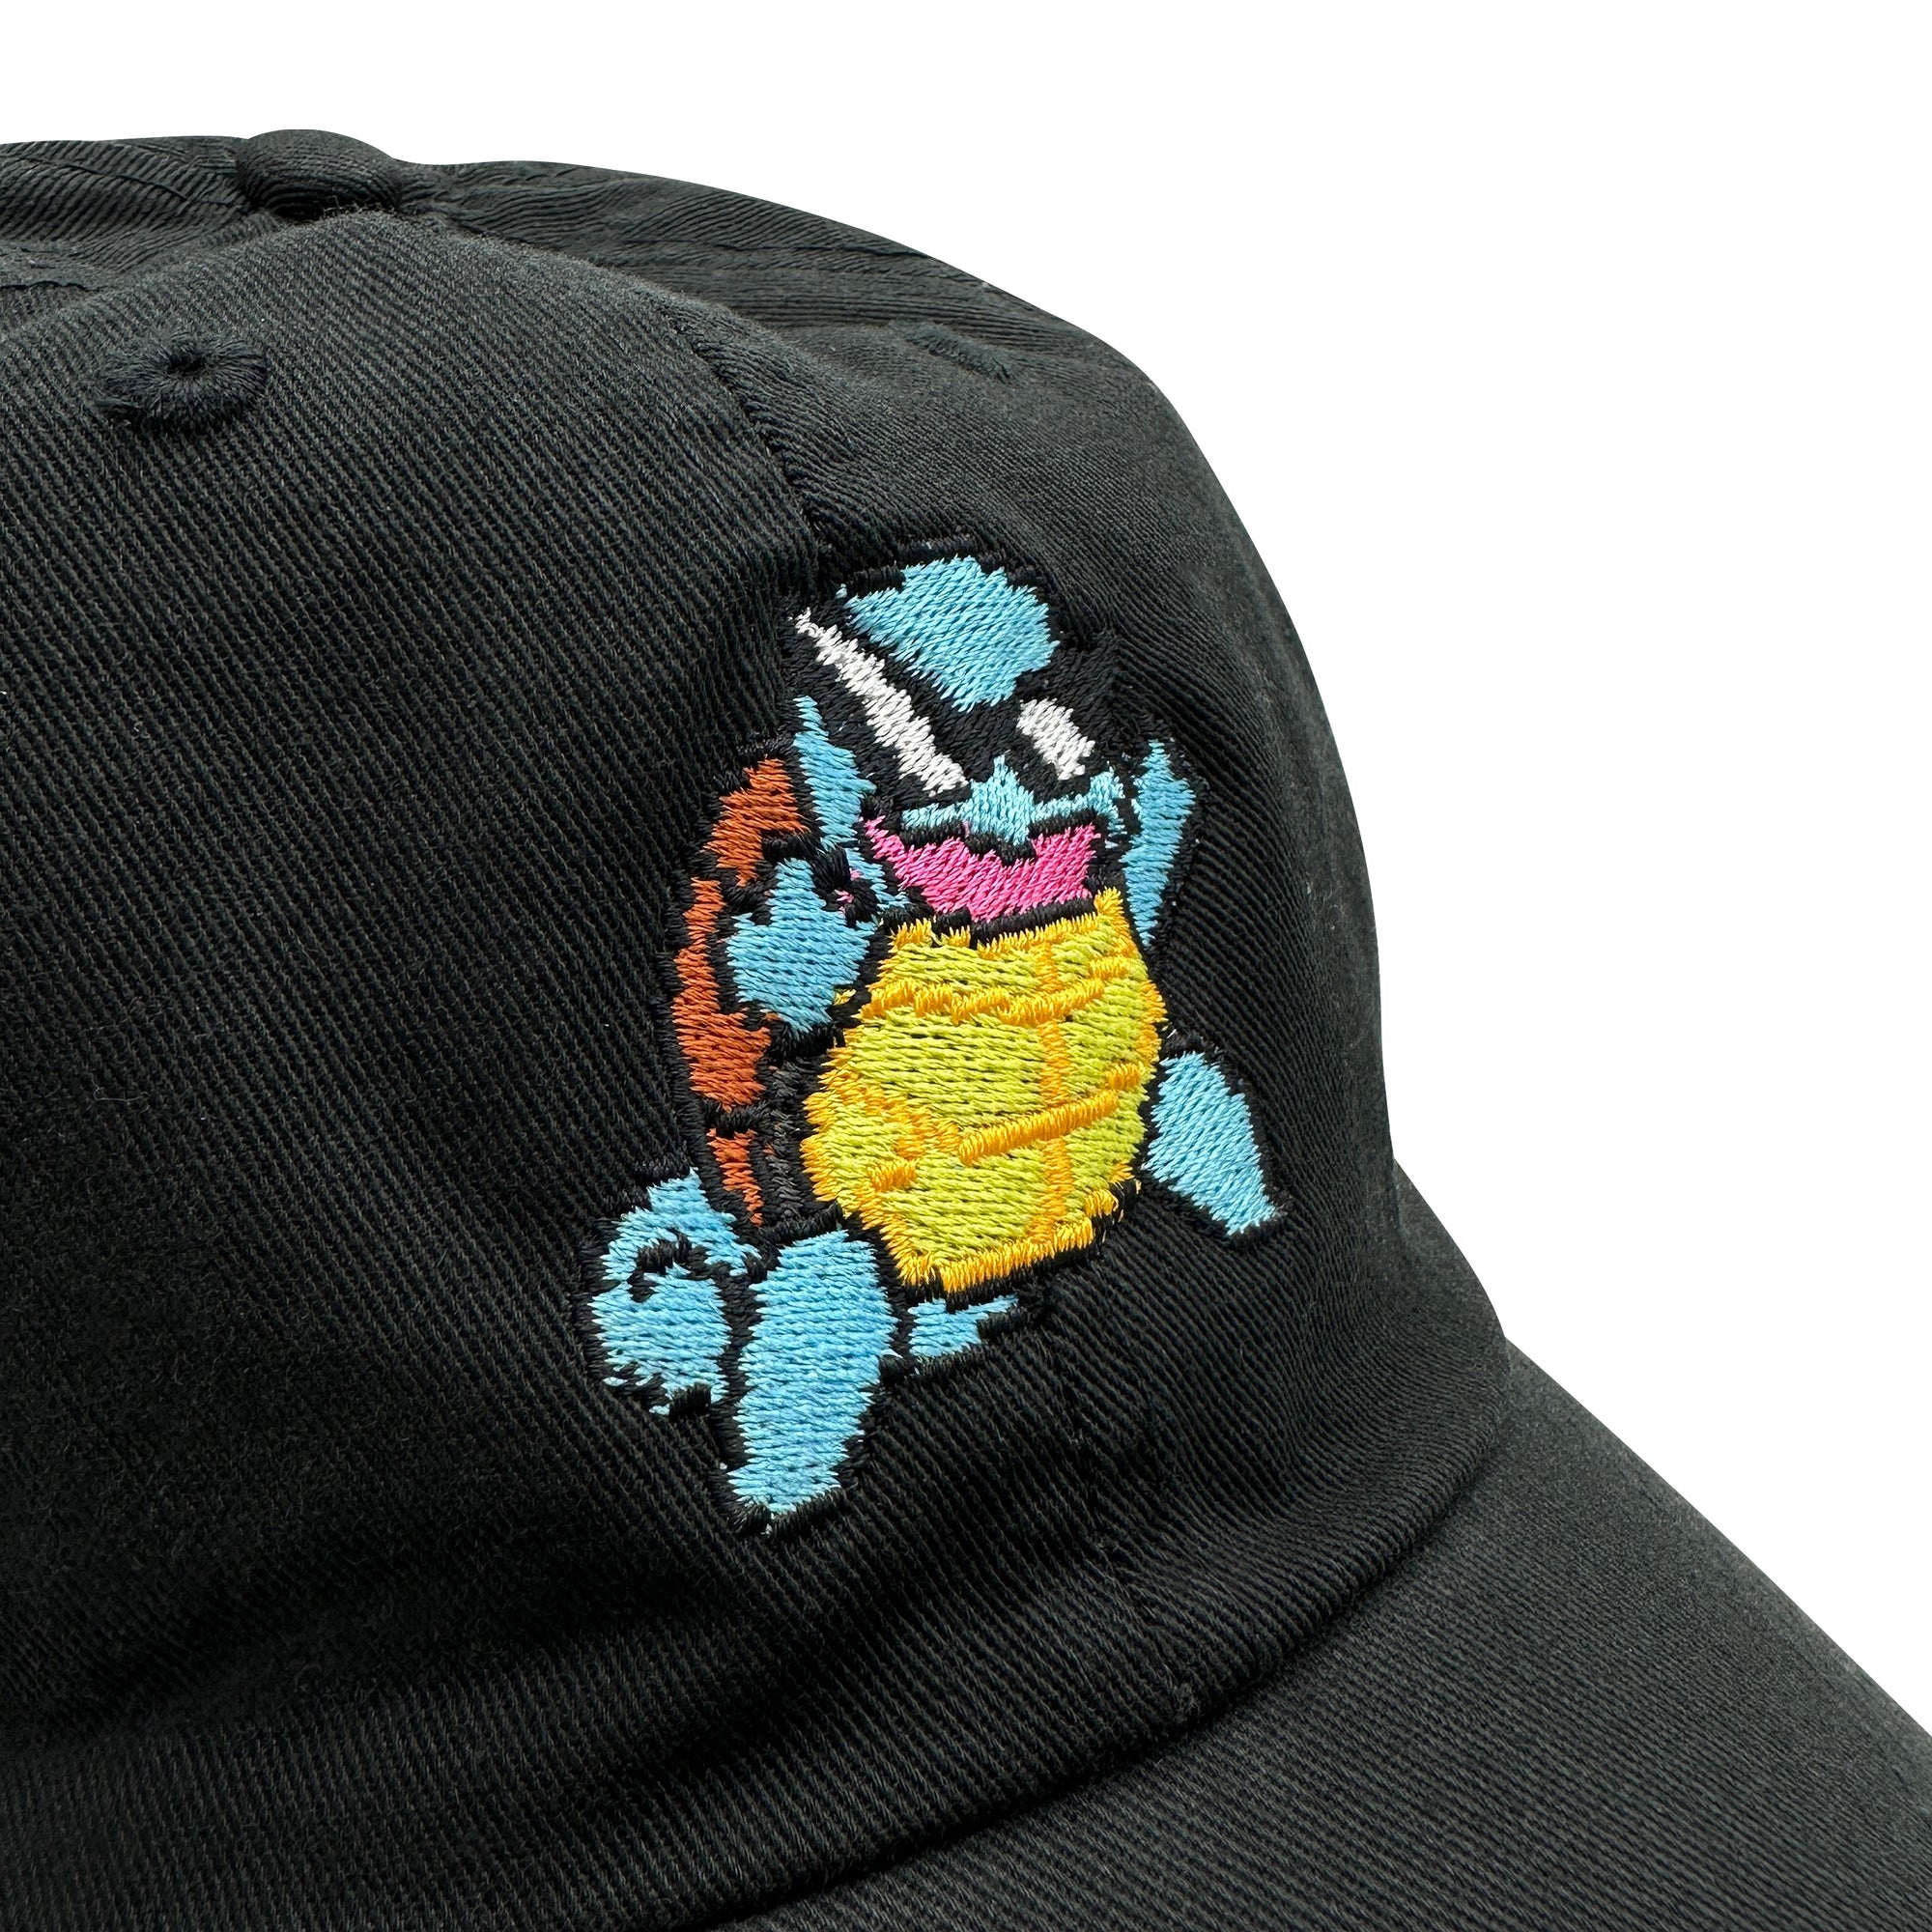 Squirtle Hat